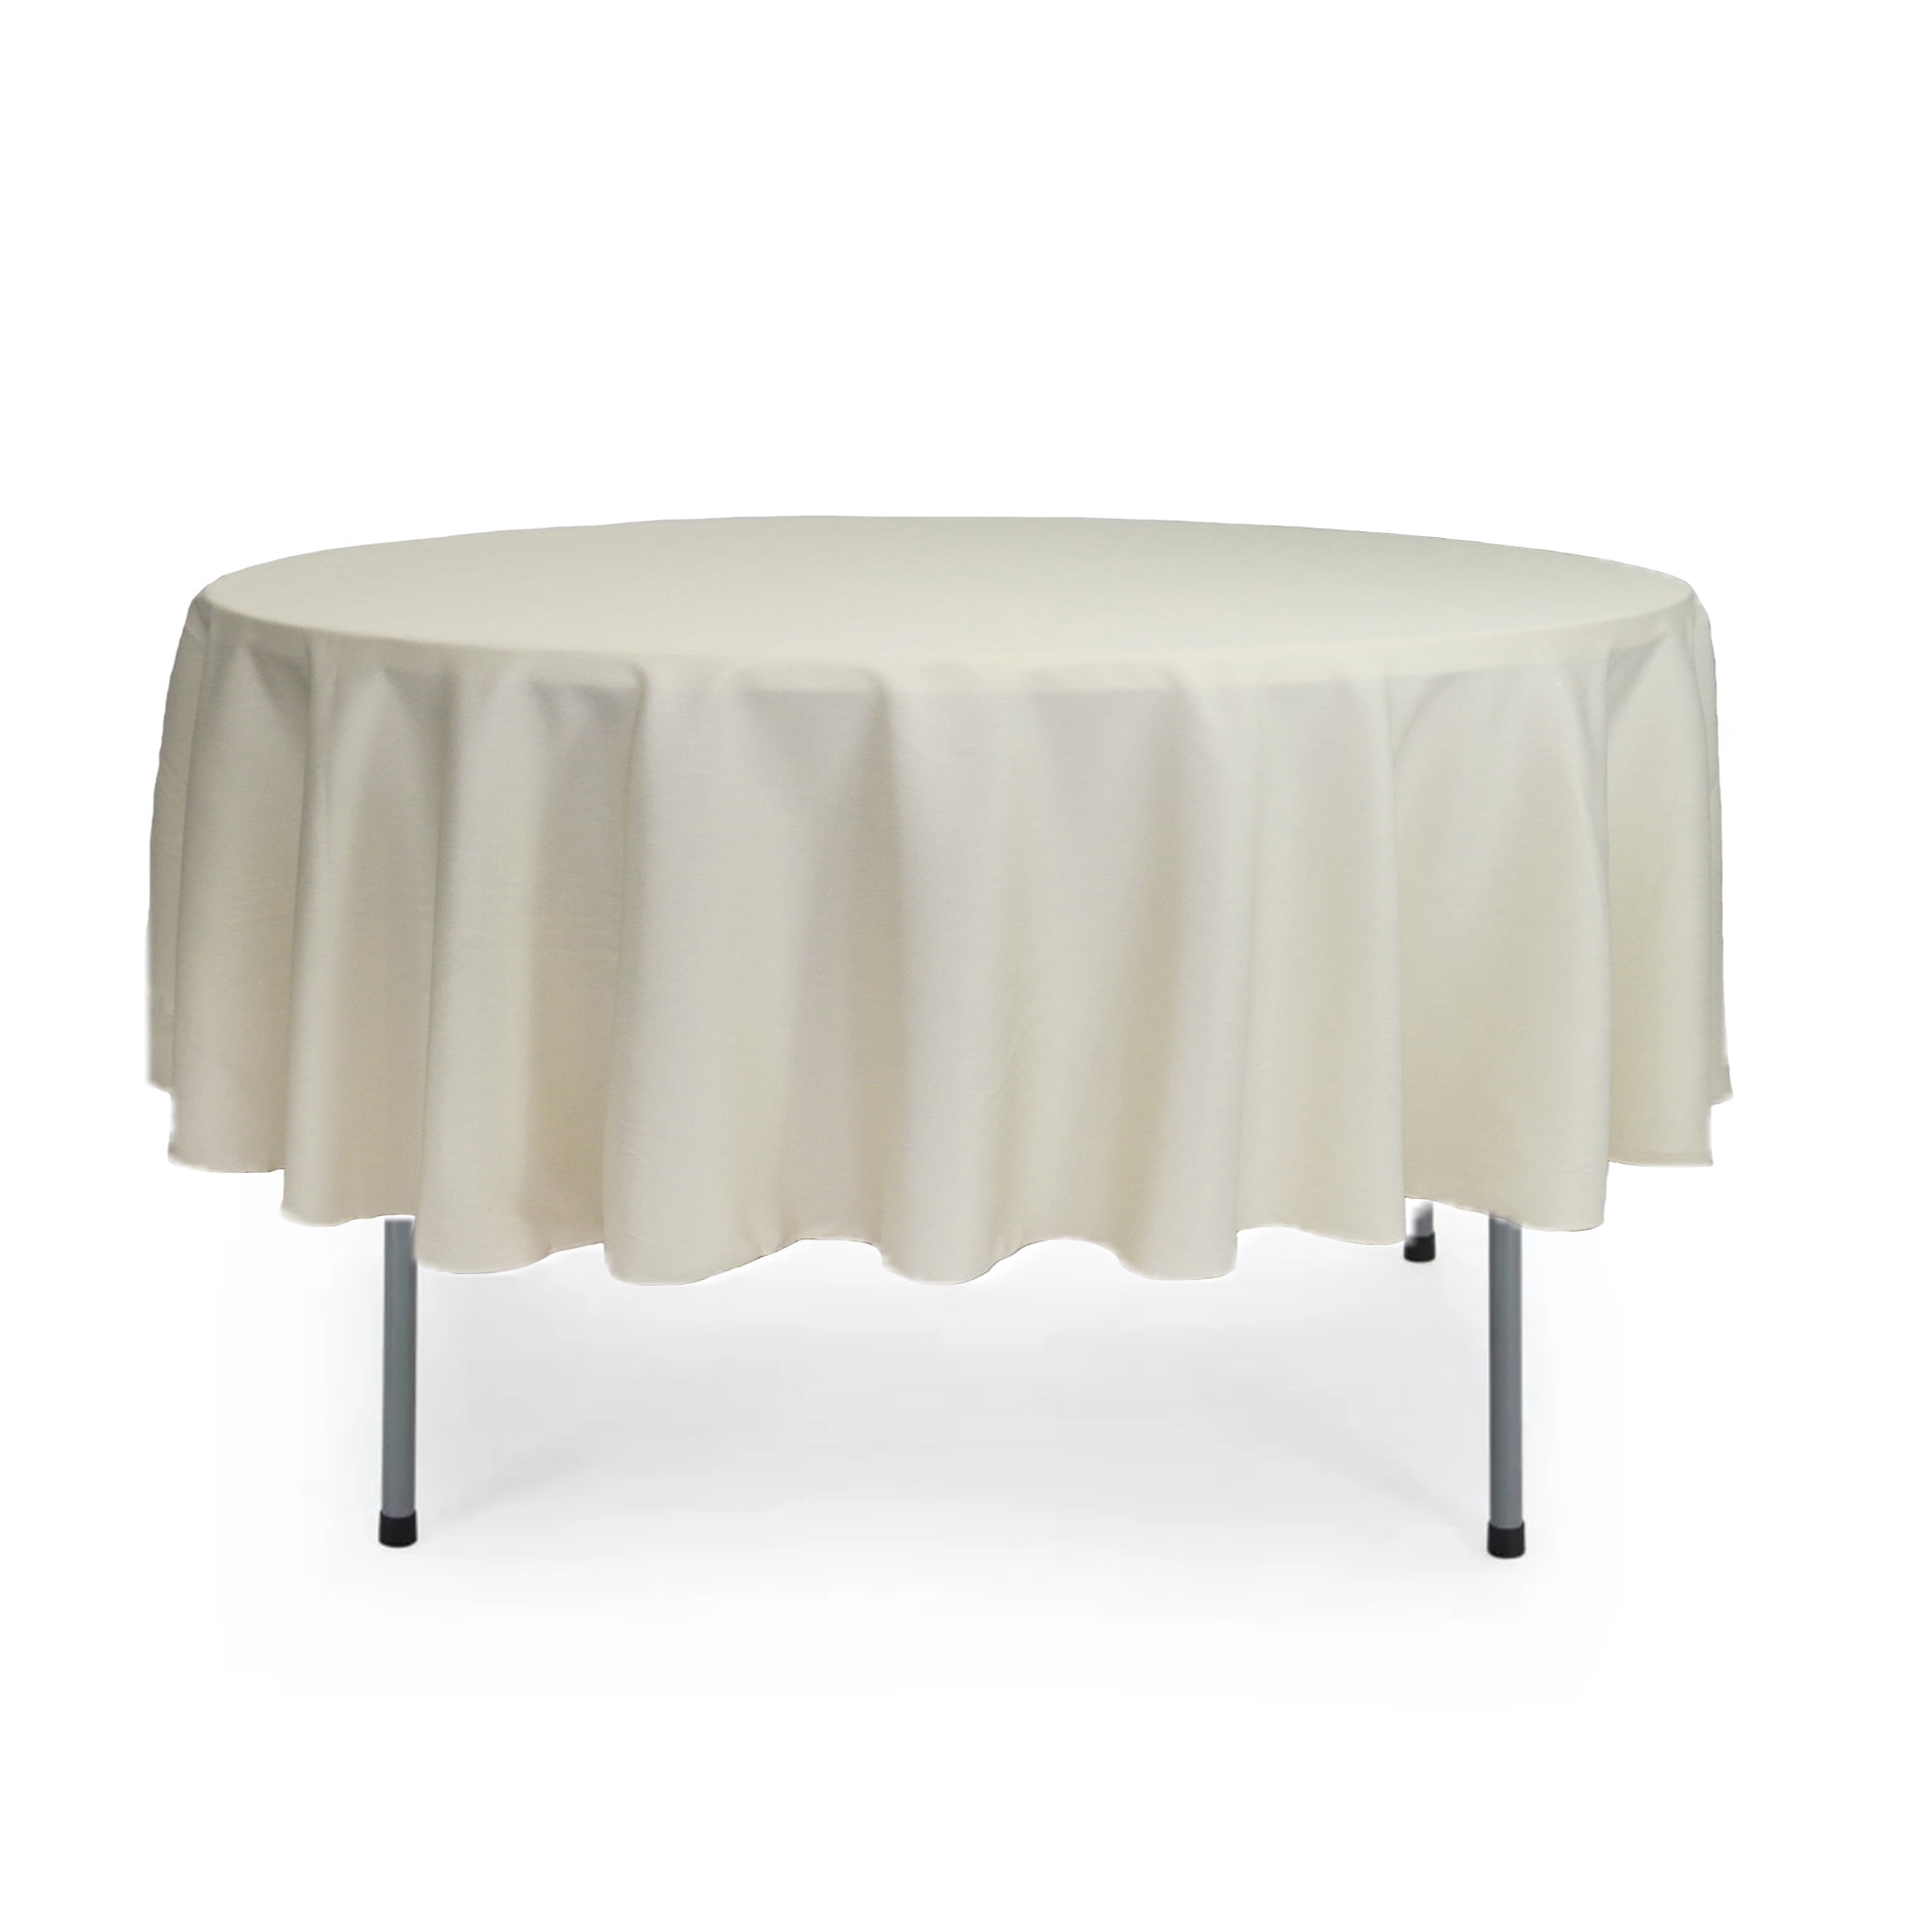 Your Chair Covers 90 Inch Round, How Big Is A 90 Inch Round Table Pad